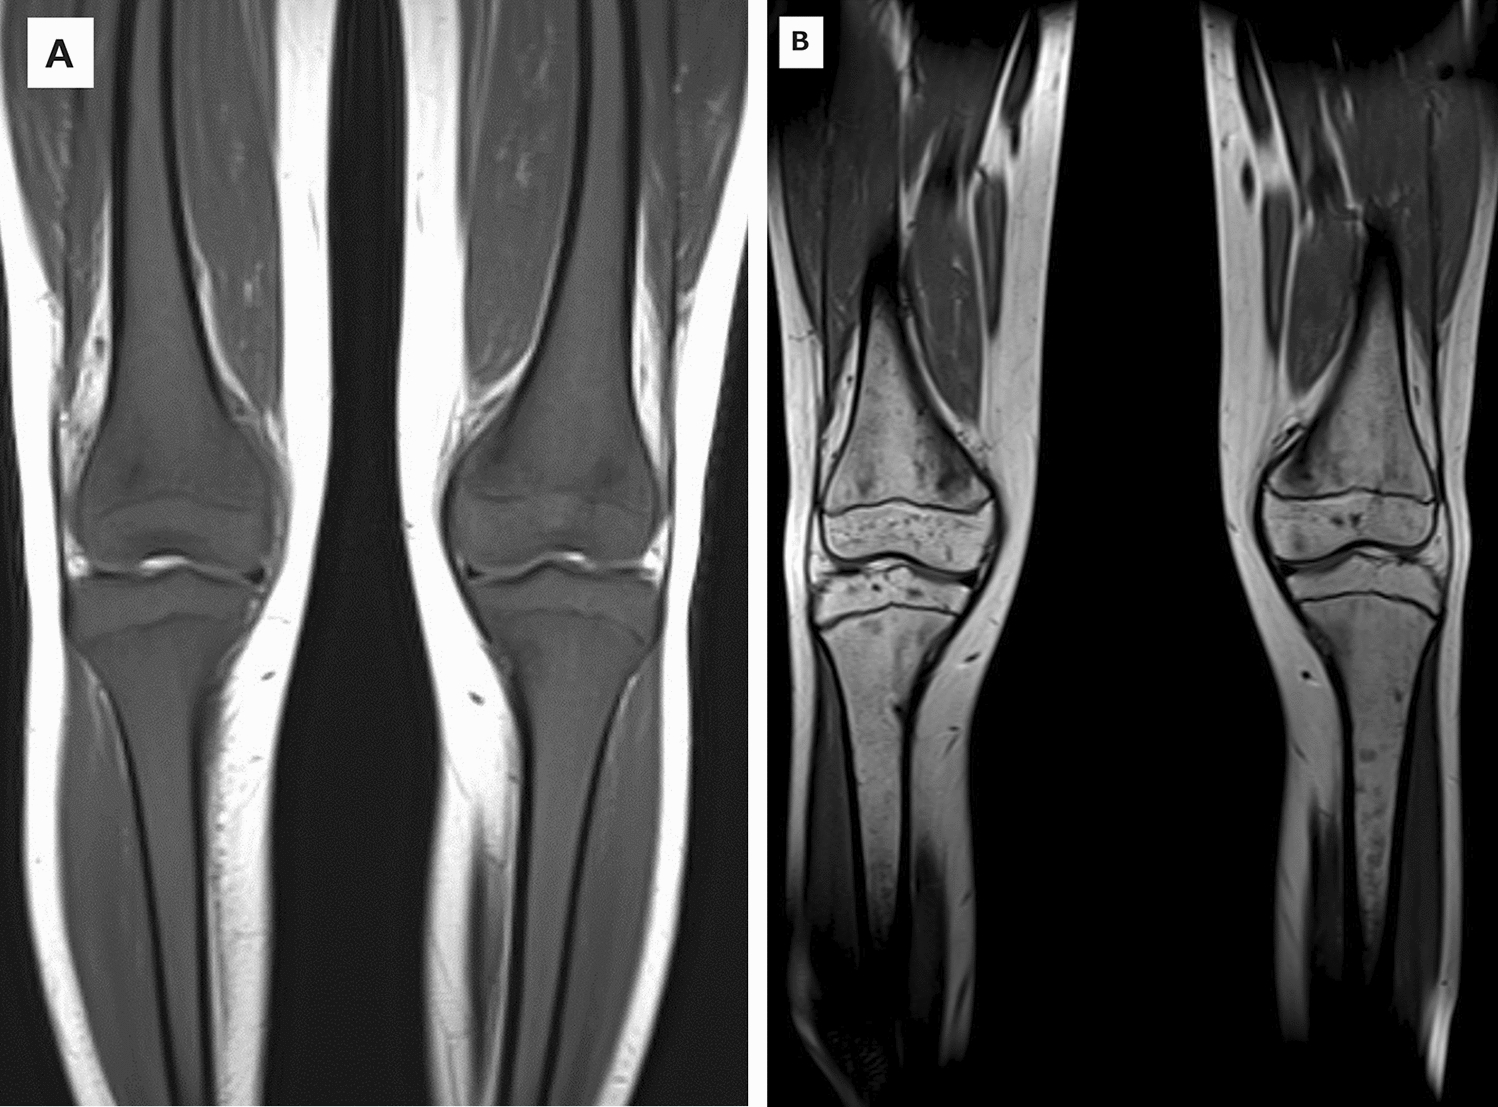 Abnormal bone marrow T1-weighted MRI images in a pediatric patient with acute lymphoblastic leukemia without peripheral blasts